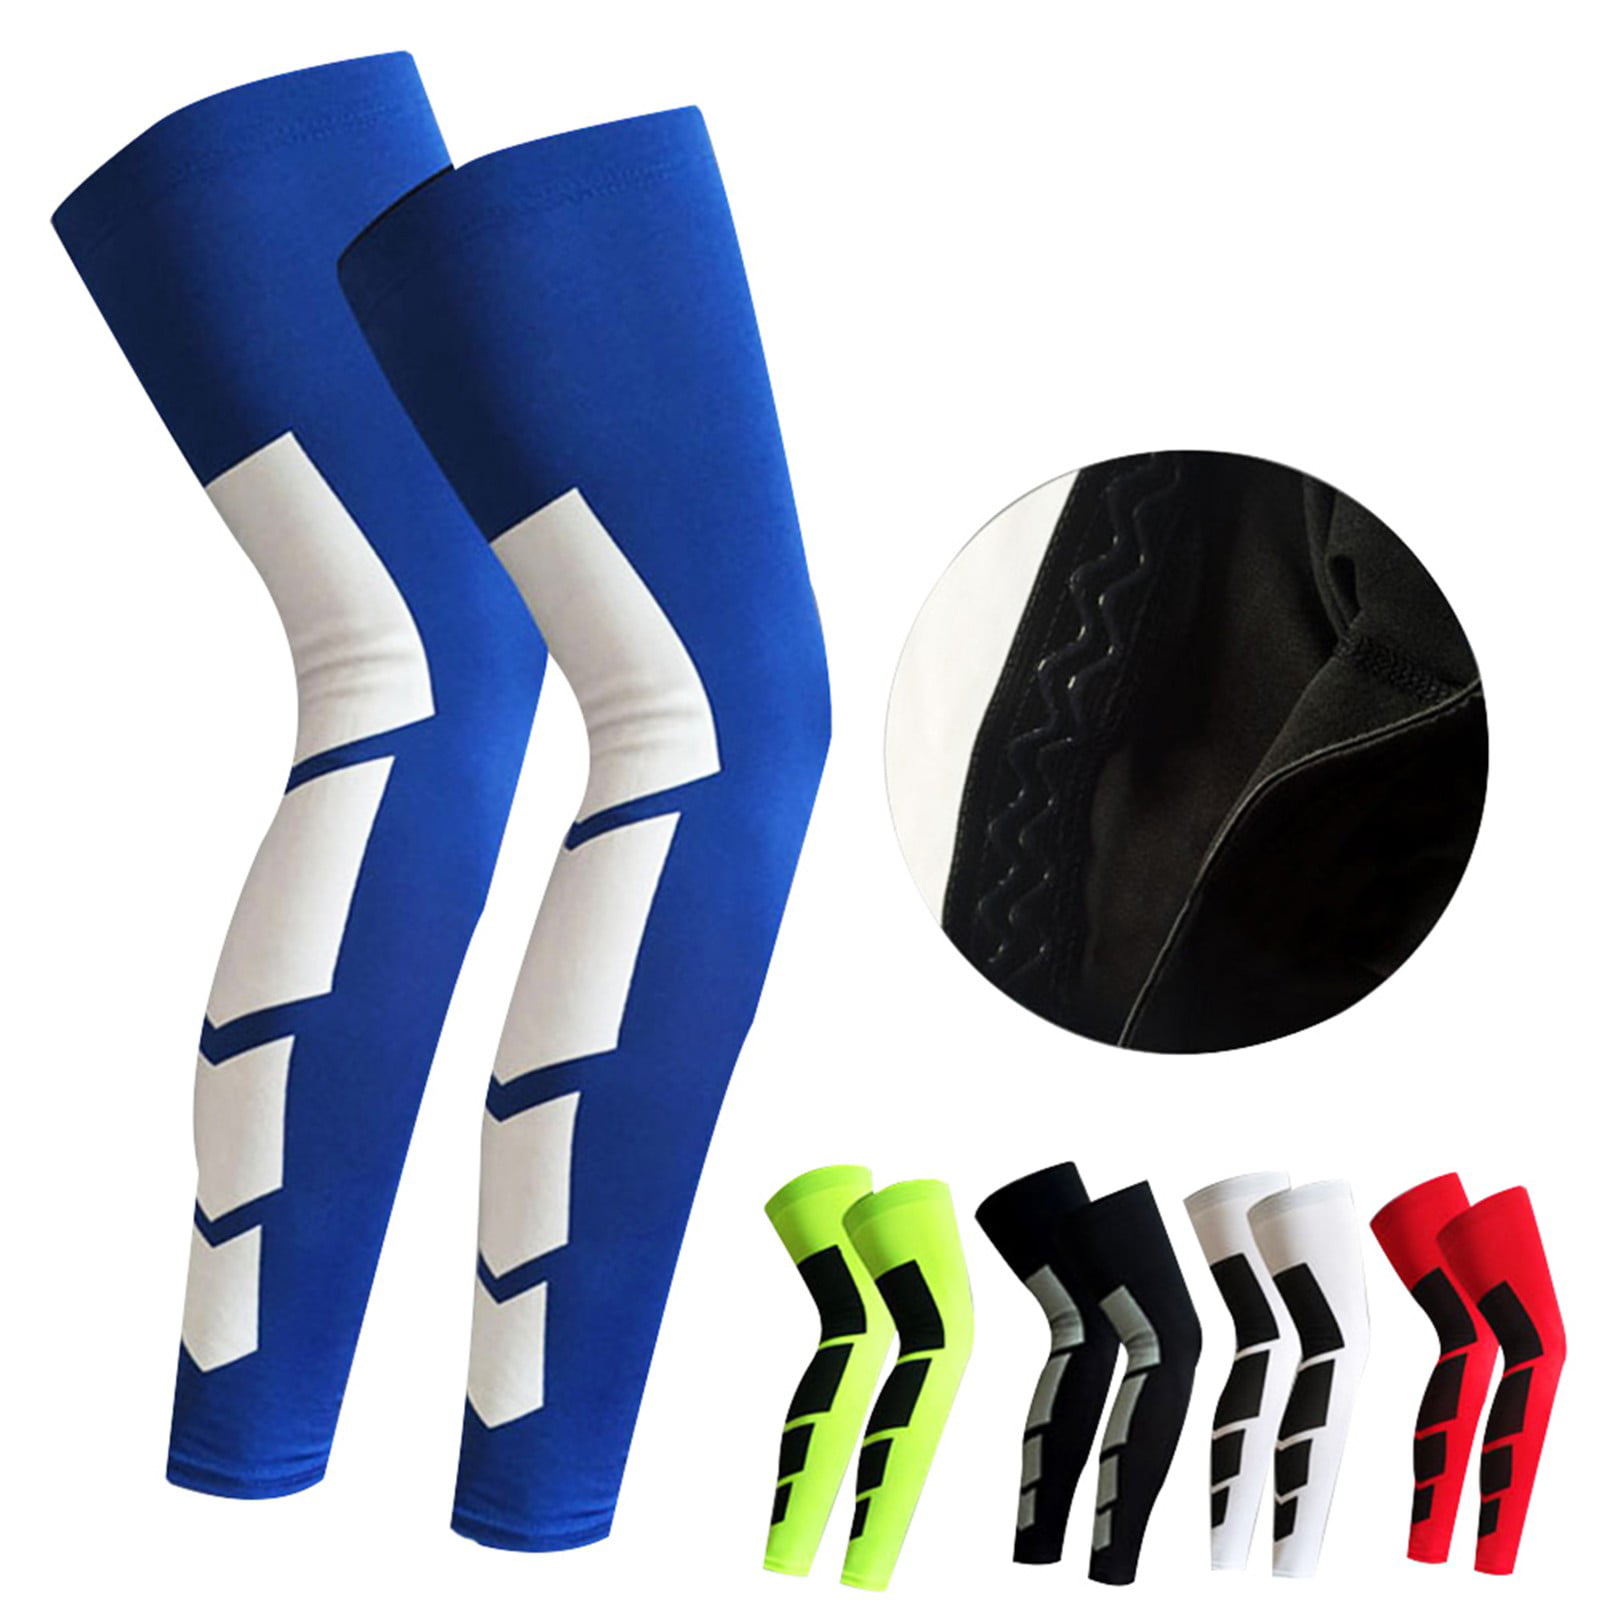 M Baiyu 1 Pair Knee Leg Shin Long Sleeve Basketball Compression Guard Protector Gear Stretch Shin Sleeves Covers Antislip Injury Relief for Running Cycling Rugby Football Crossfit Various Colors 